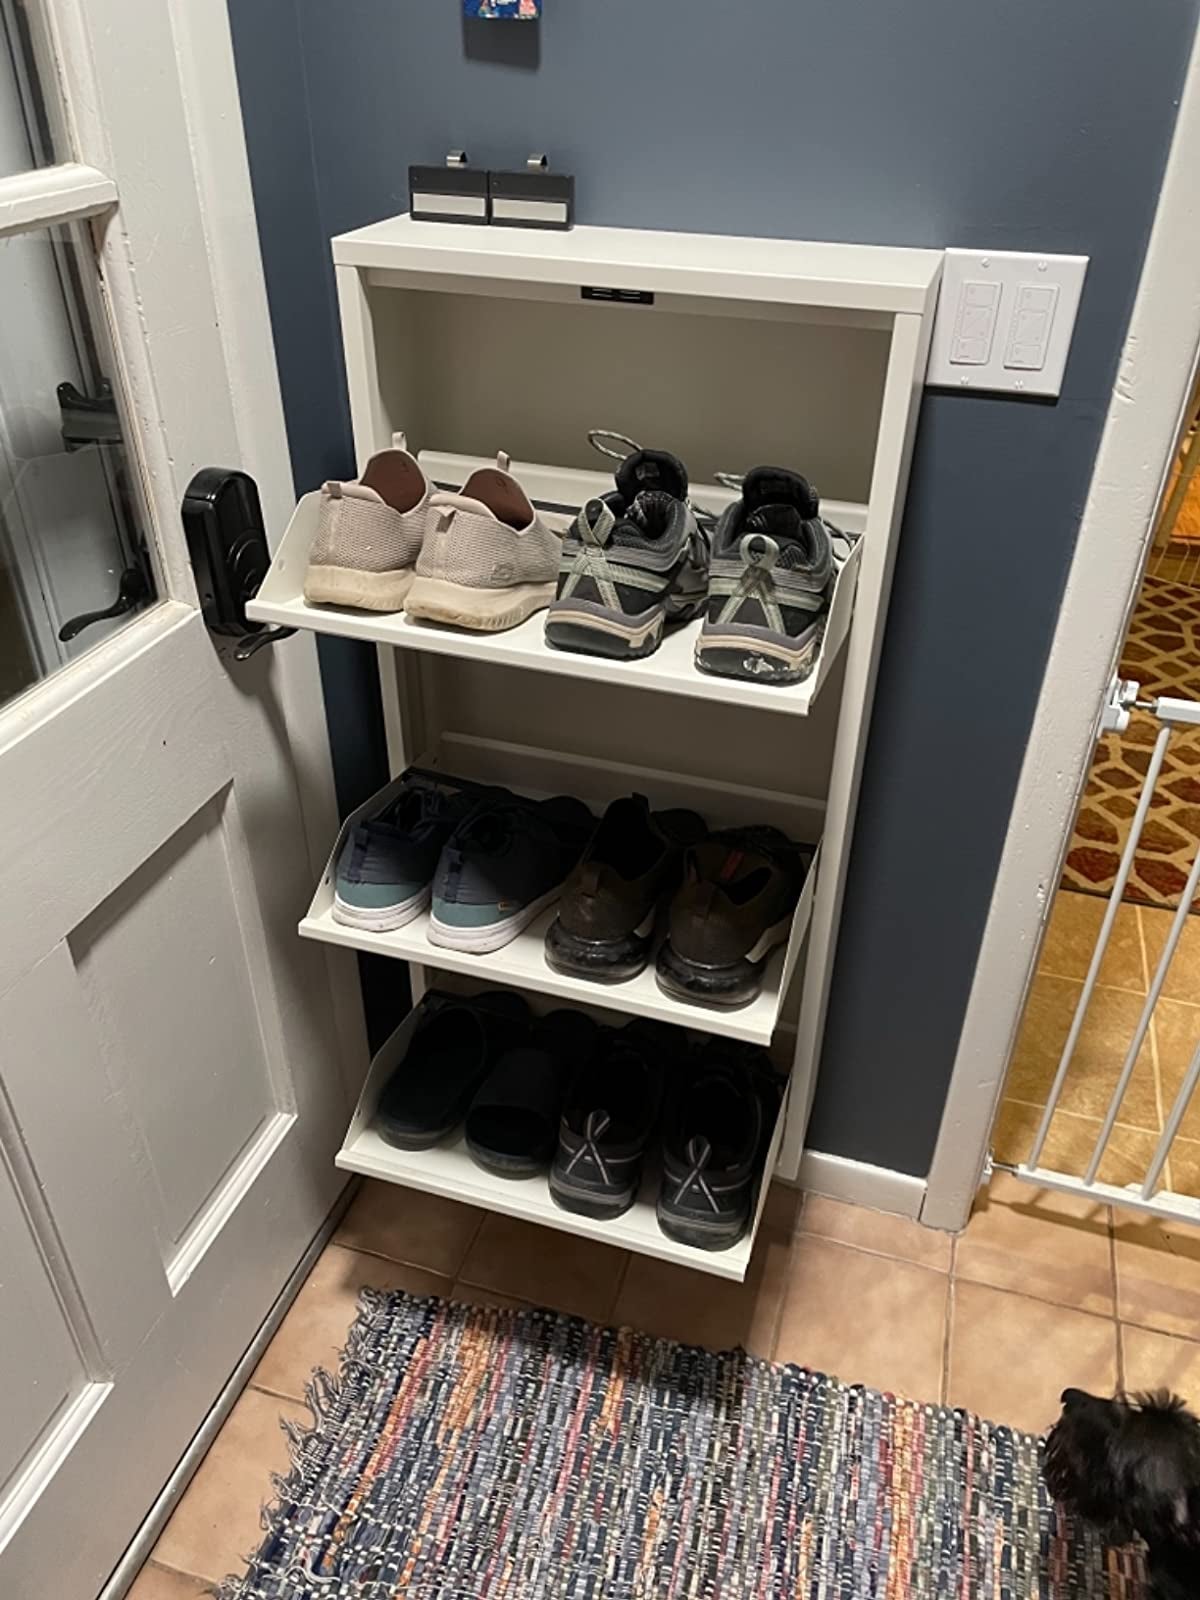 Best Entryway Shoe Storage Ideas That Are Chic and Functional